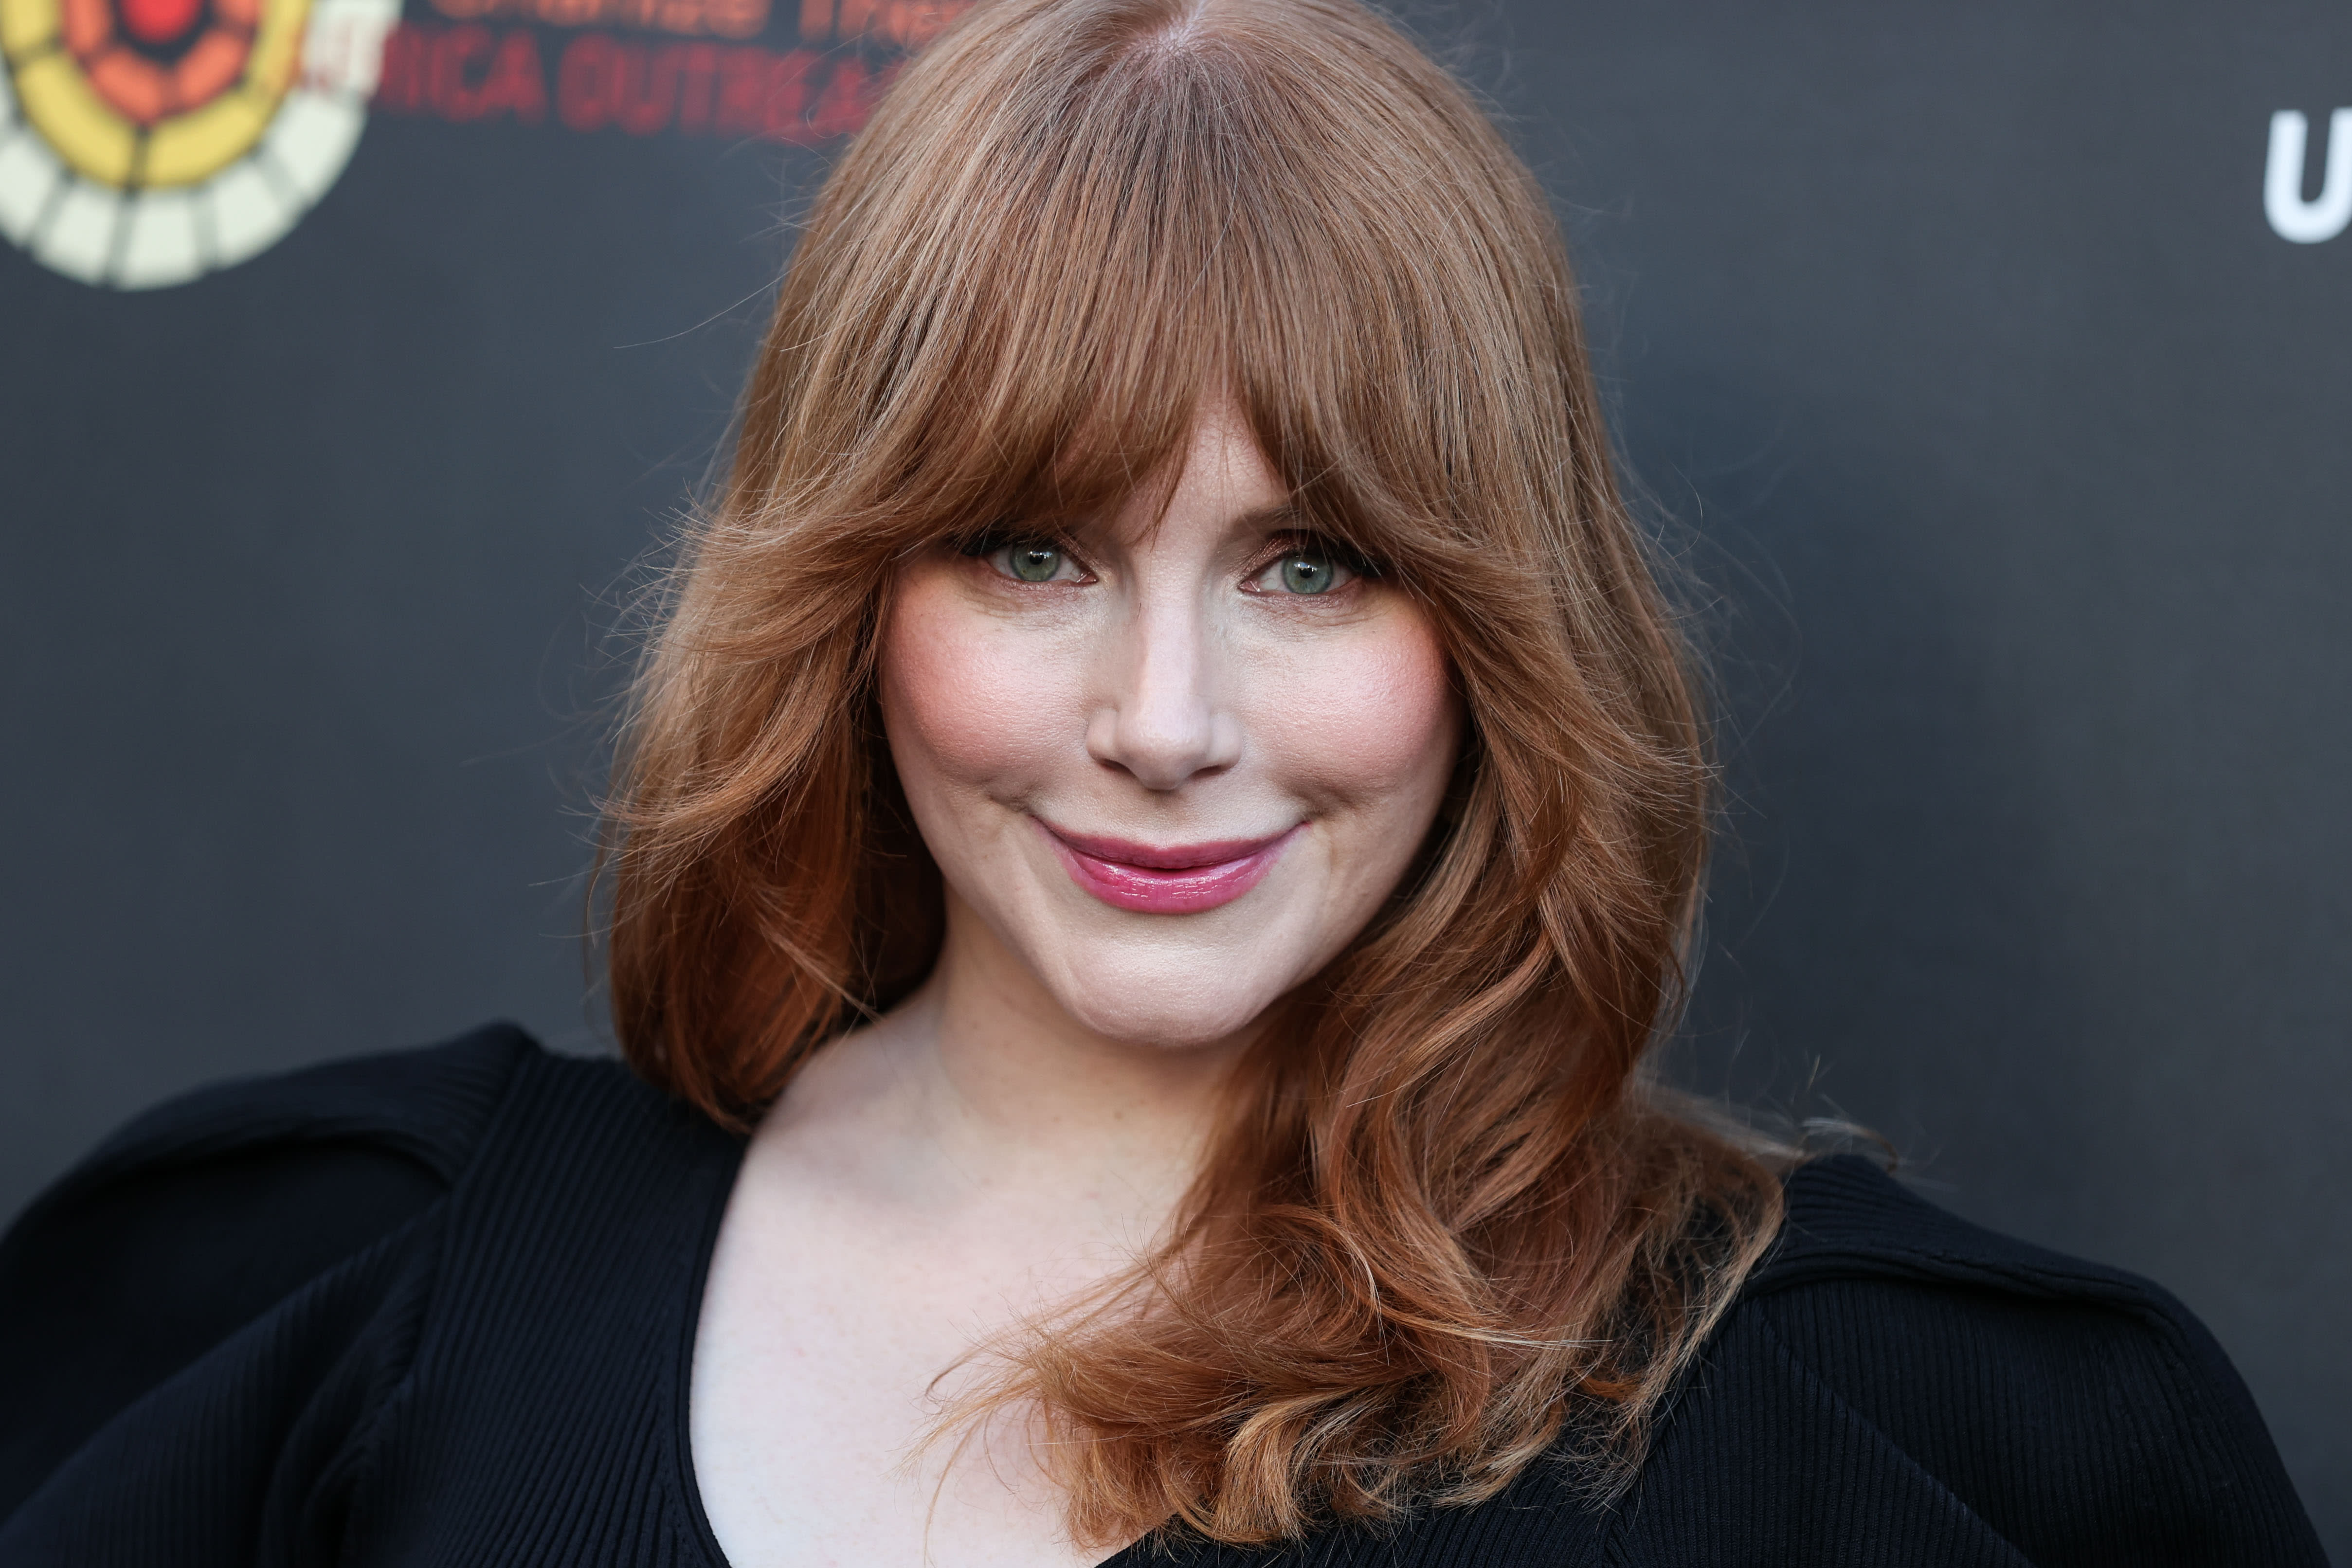 Bryce Dallas Howard Was Pressured To Lose Weight Before Filming Jurassic World Dominion: "I Have Been Asked To Not Use My Natural Body In Cinema"